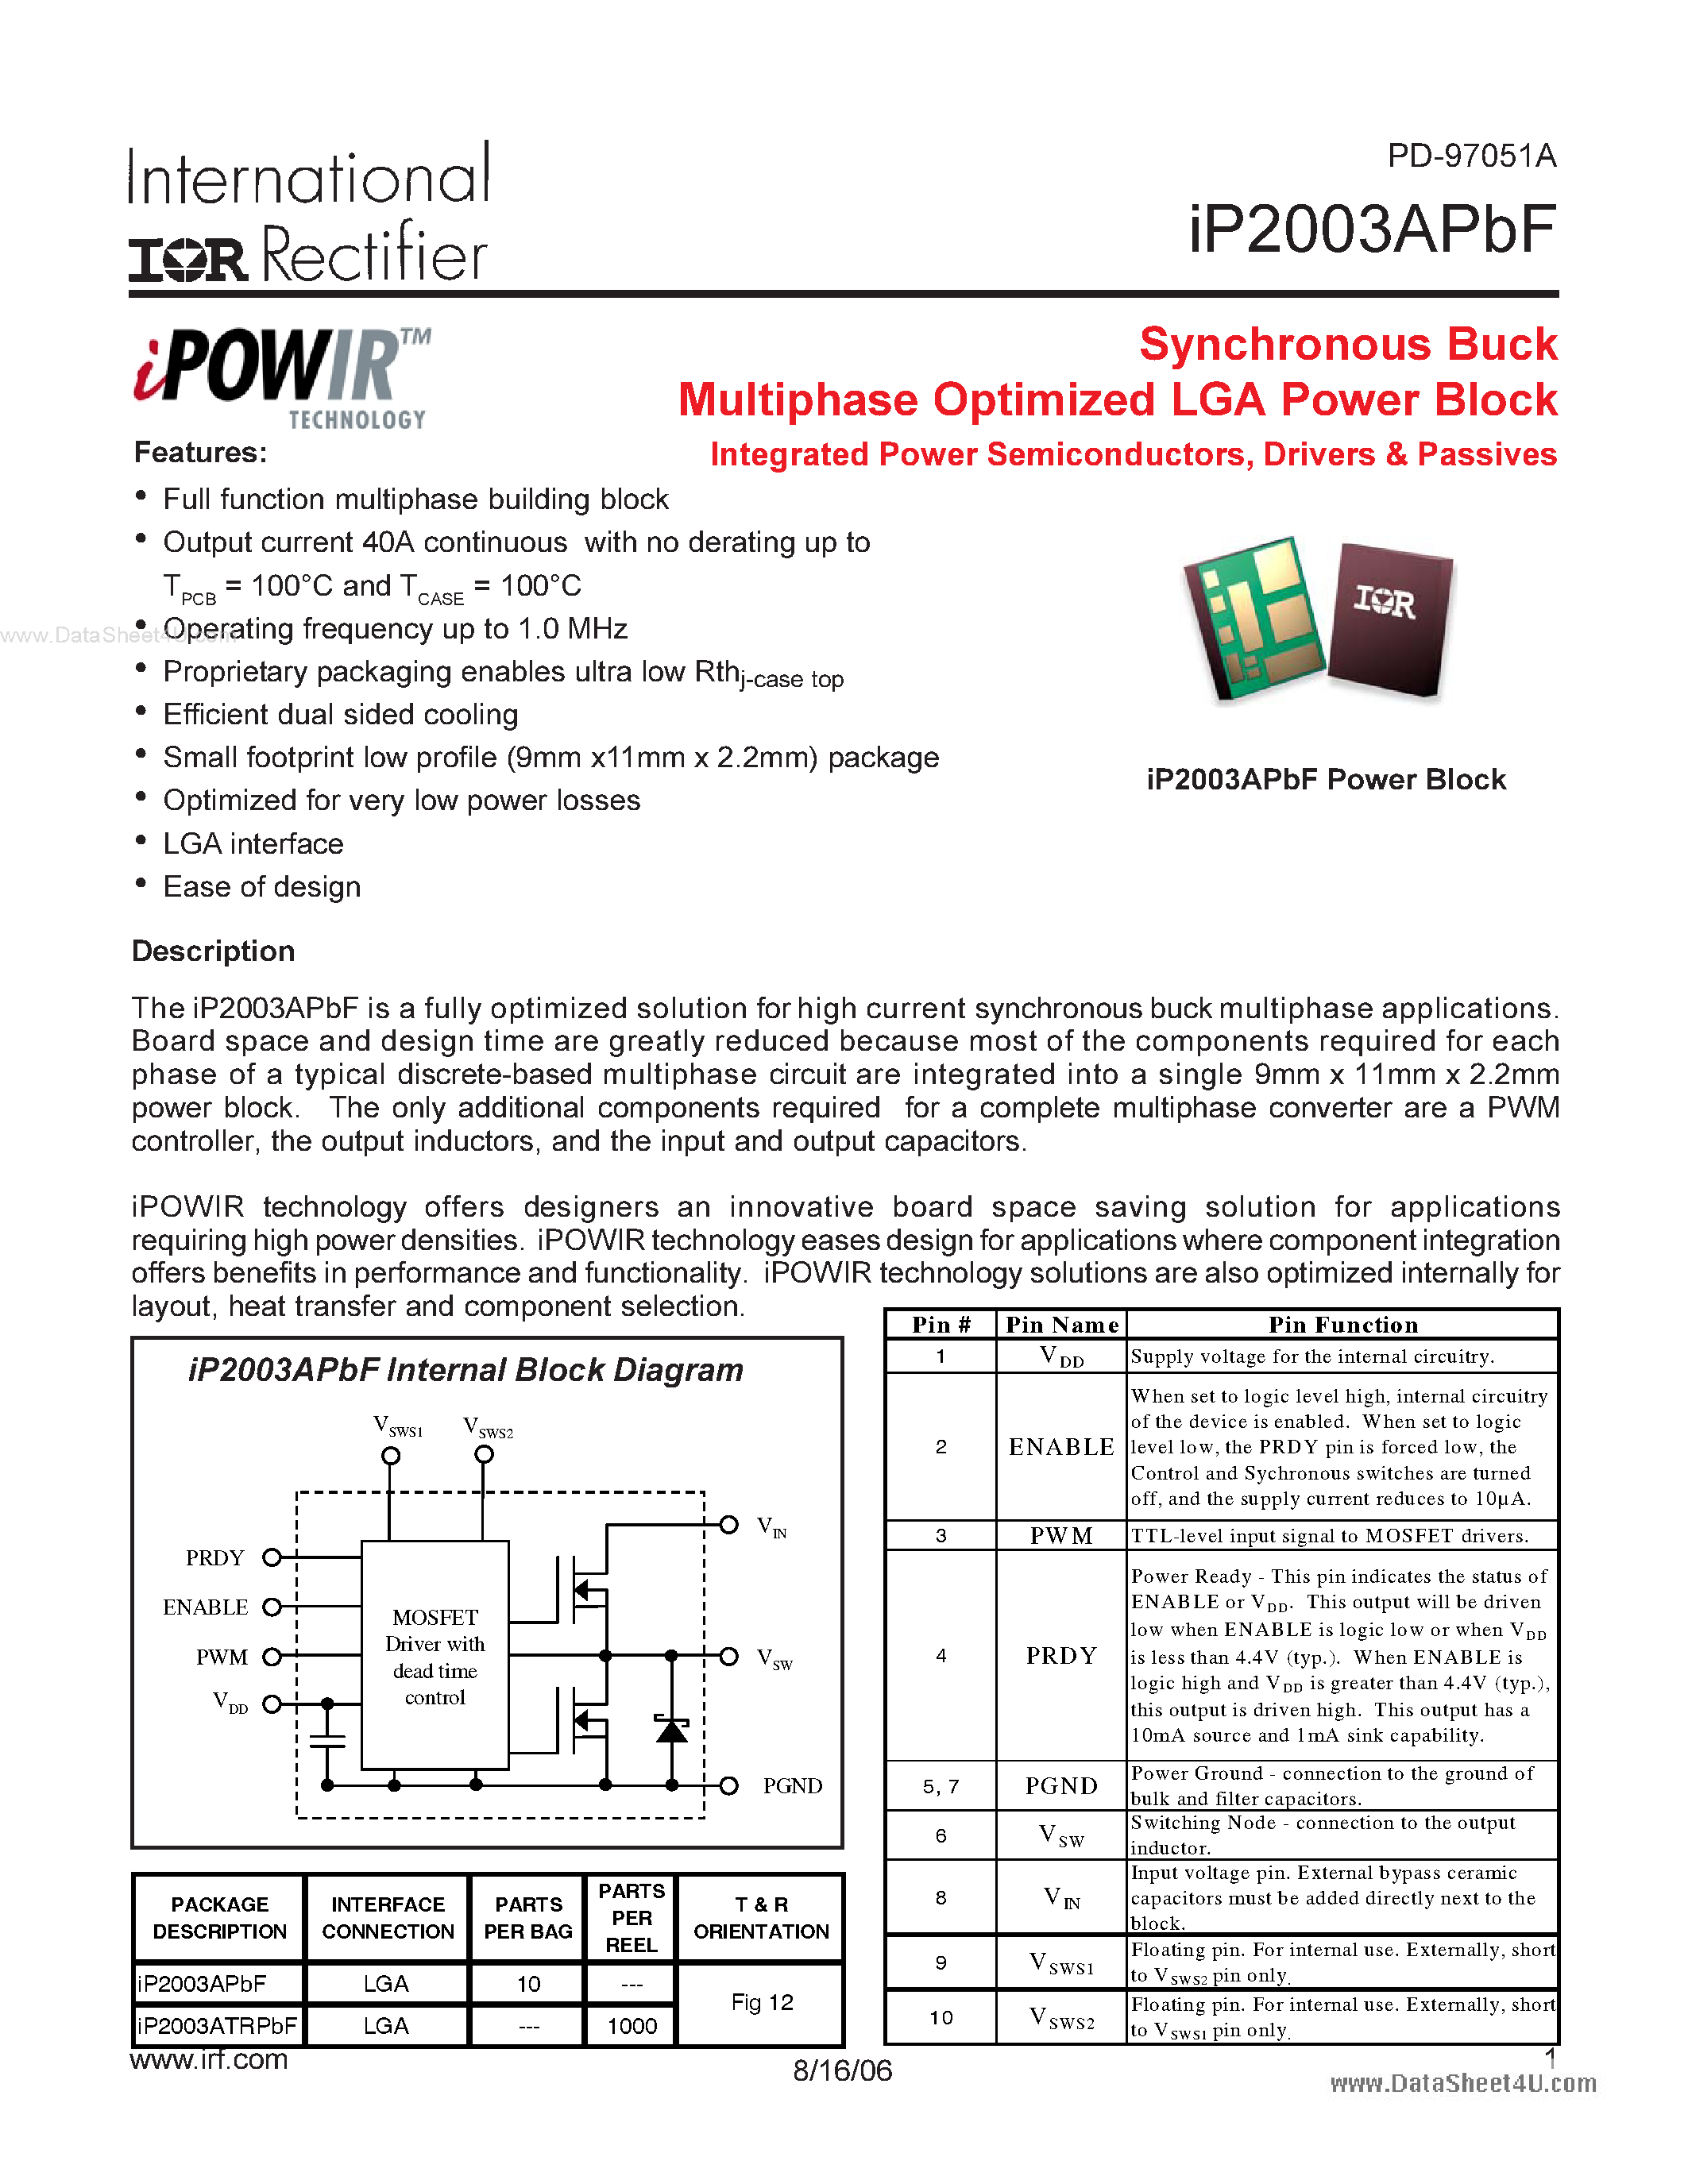 Даташит IP2003APBF - Synchronous Buck Multiphase Optimized LGA Power Block Intergrated Power Semiconductors страница 1